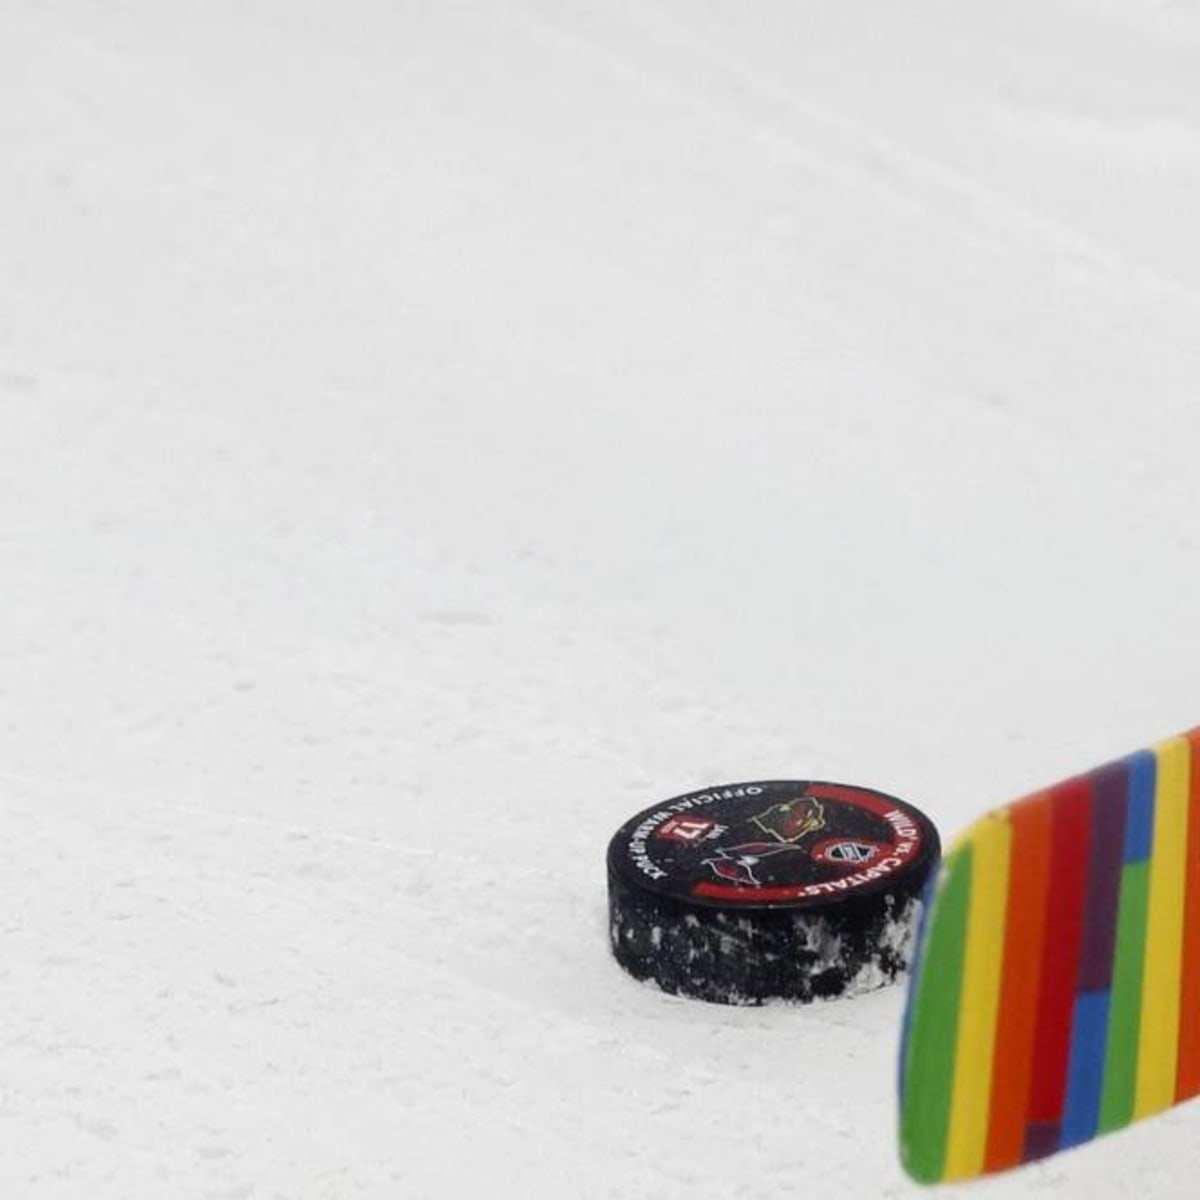 Following Pride tape ban by NHL, Penguins players weigh options, show  LGBTQ+ support